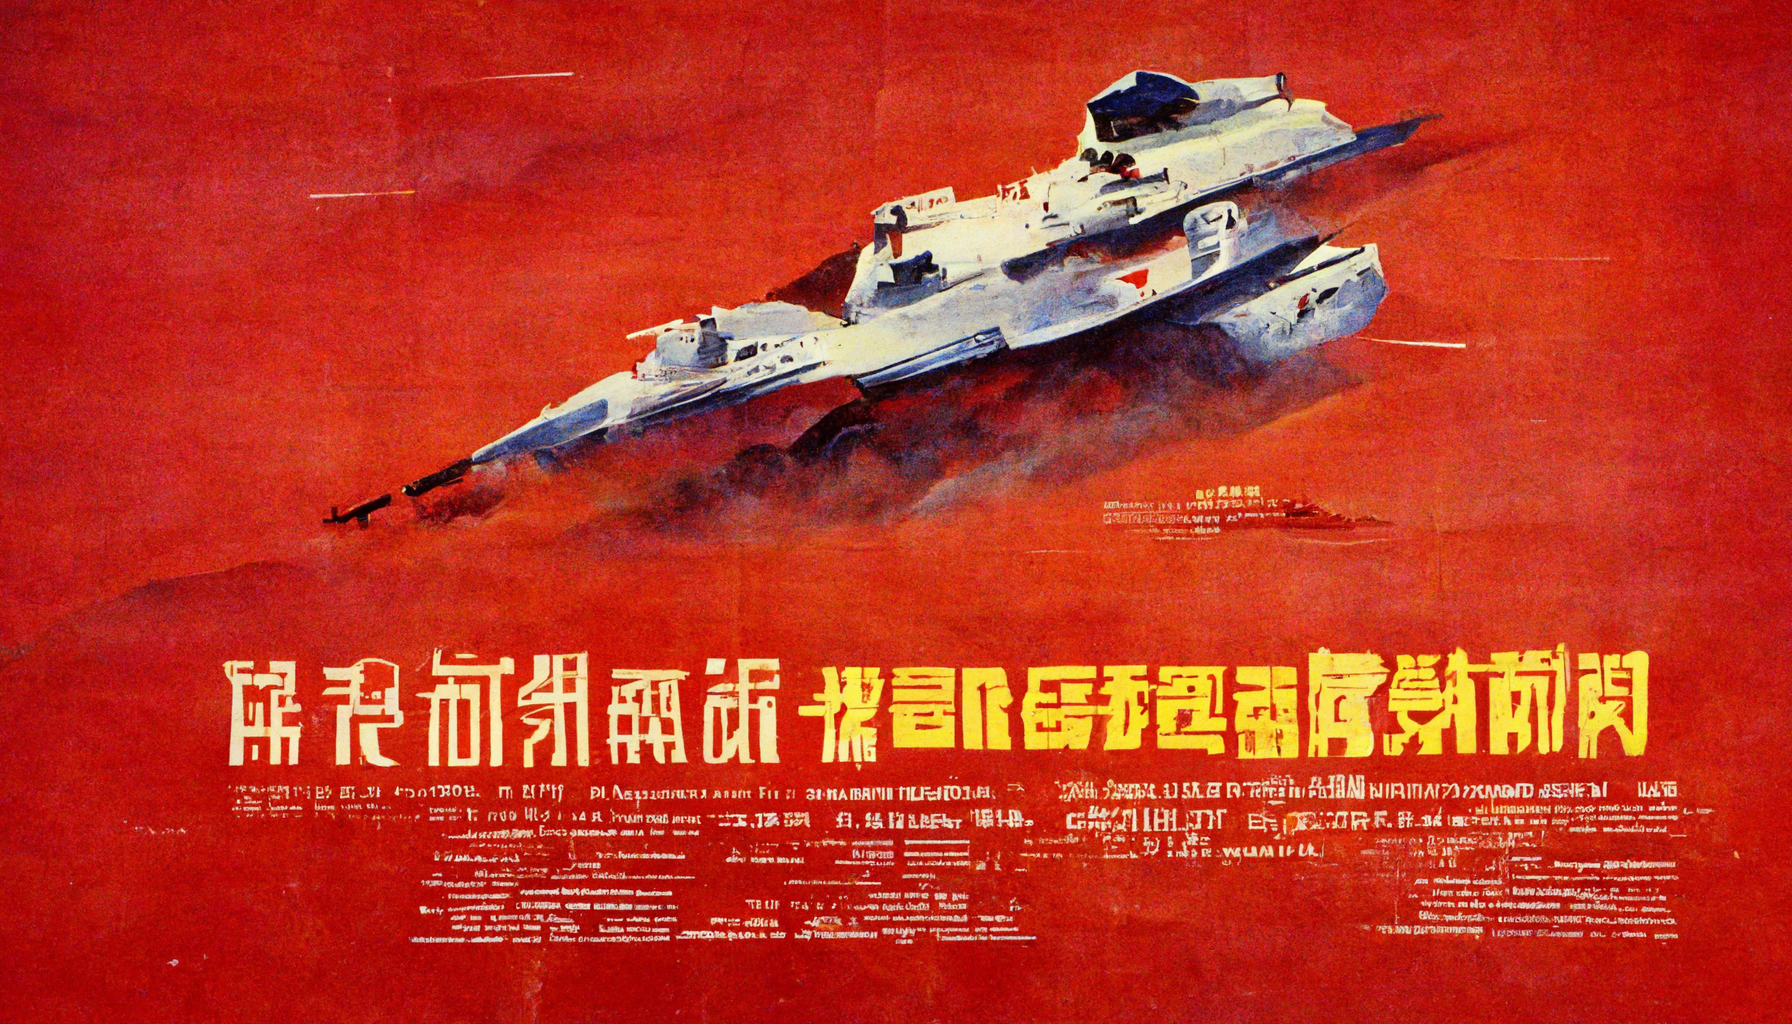 Chinese sovereignty, 80s film poster (Midjourney)